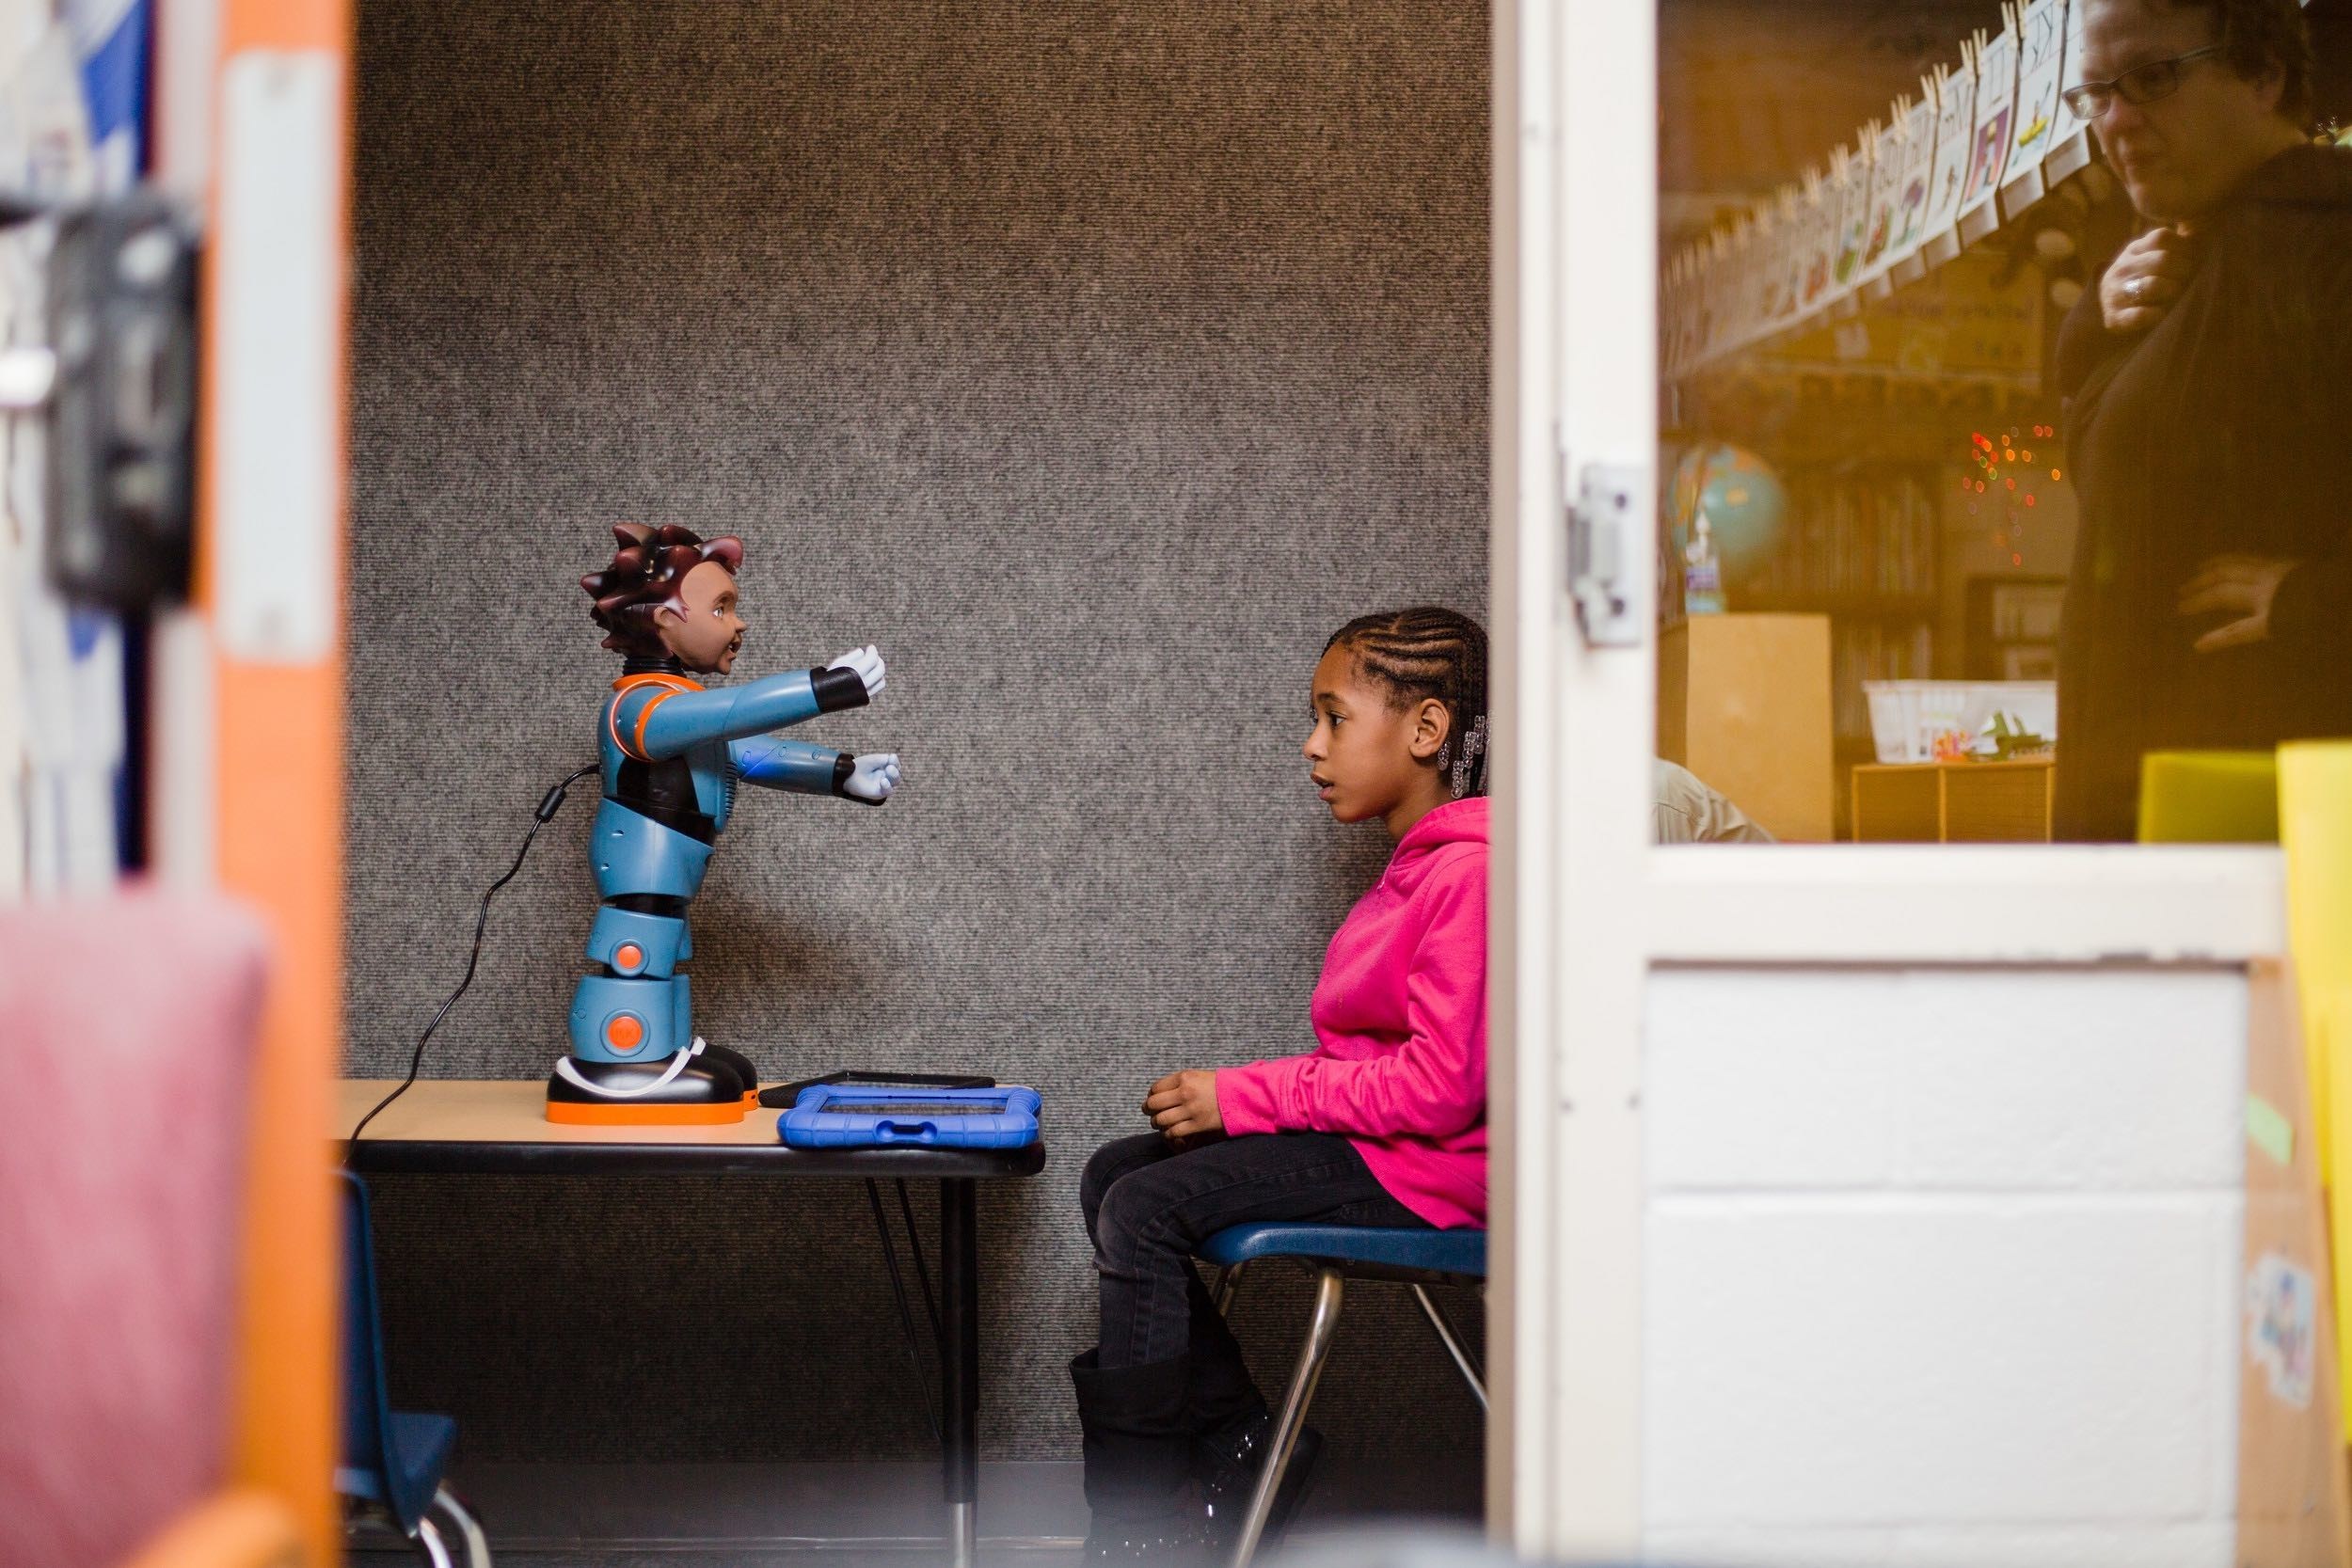 Get to Know Carver & Jemi, Two Inclusive Robots Supporting Diverse, Equitable, and Inclusive Classrooms